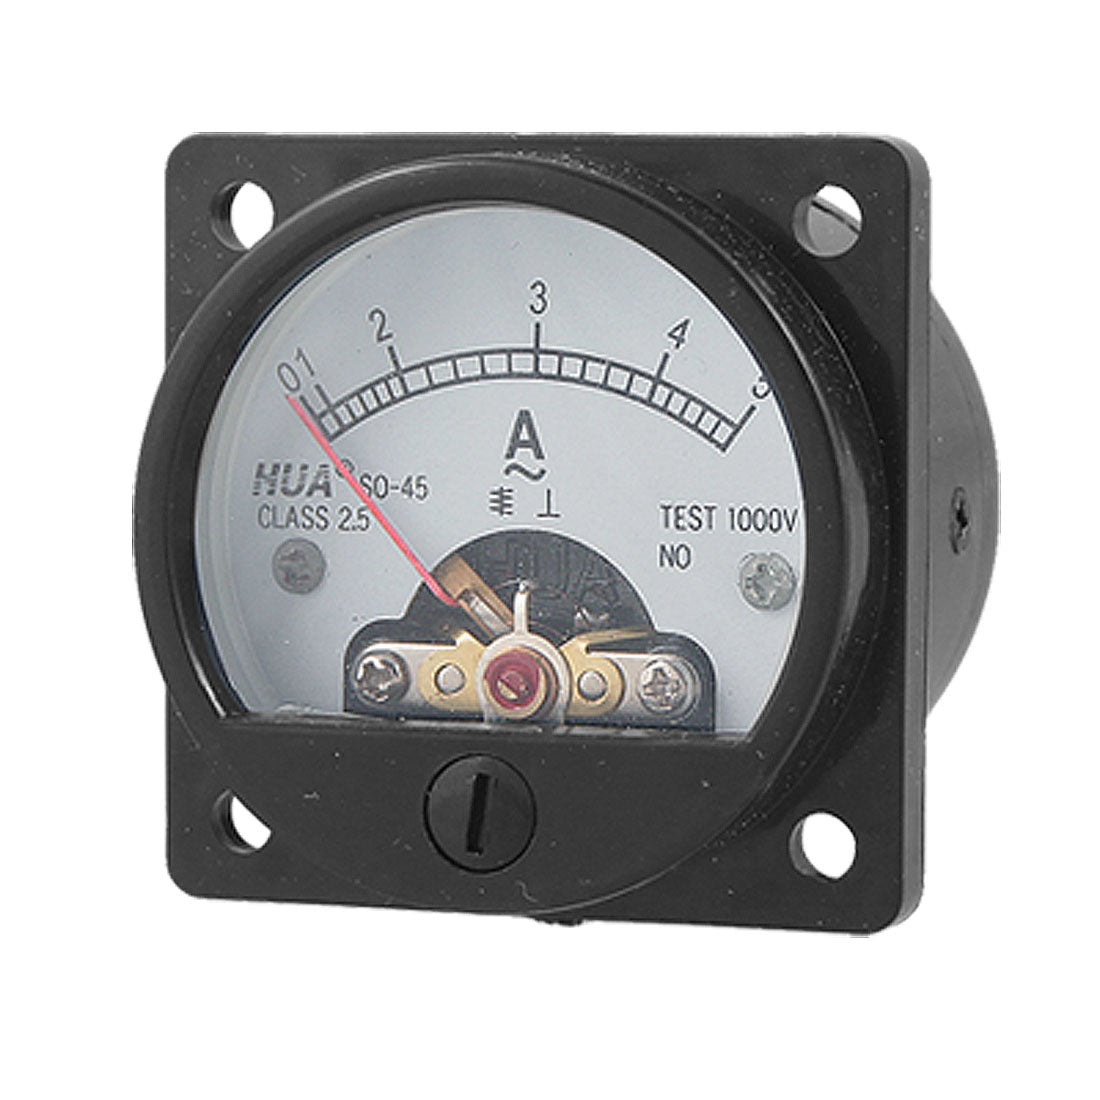 uxcell Uxcell Class 2.5 Accuracy AC 0-5A Round Analog Panel Meter Ammeter Black